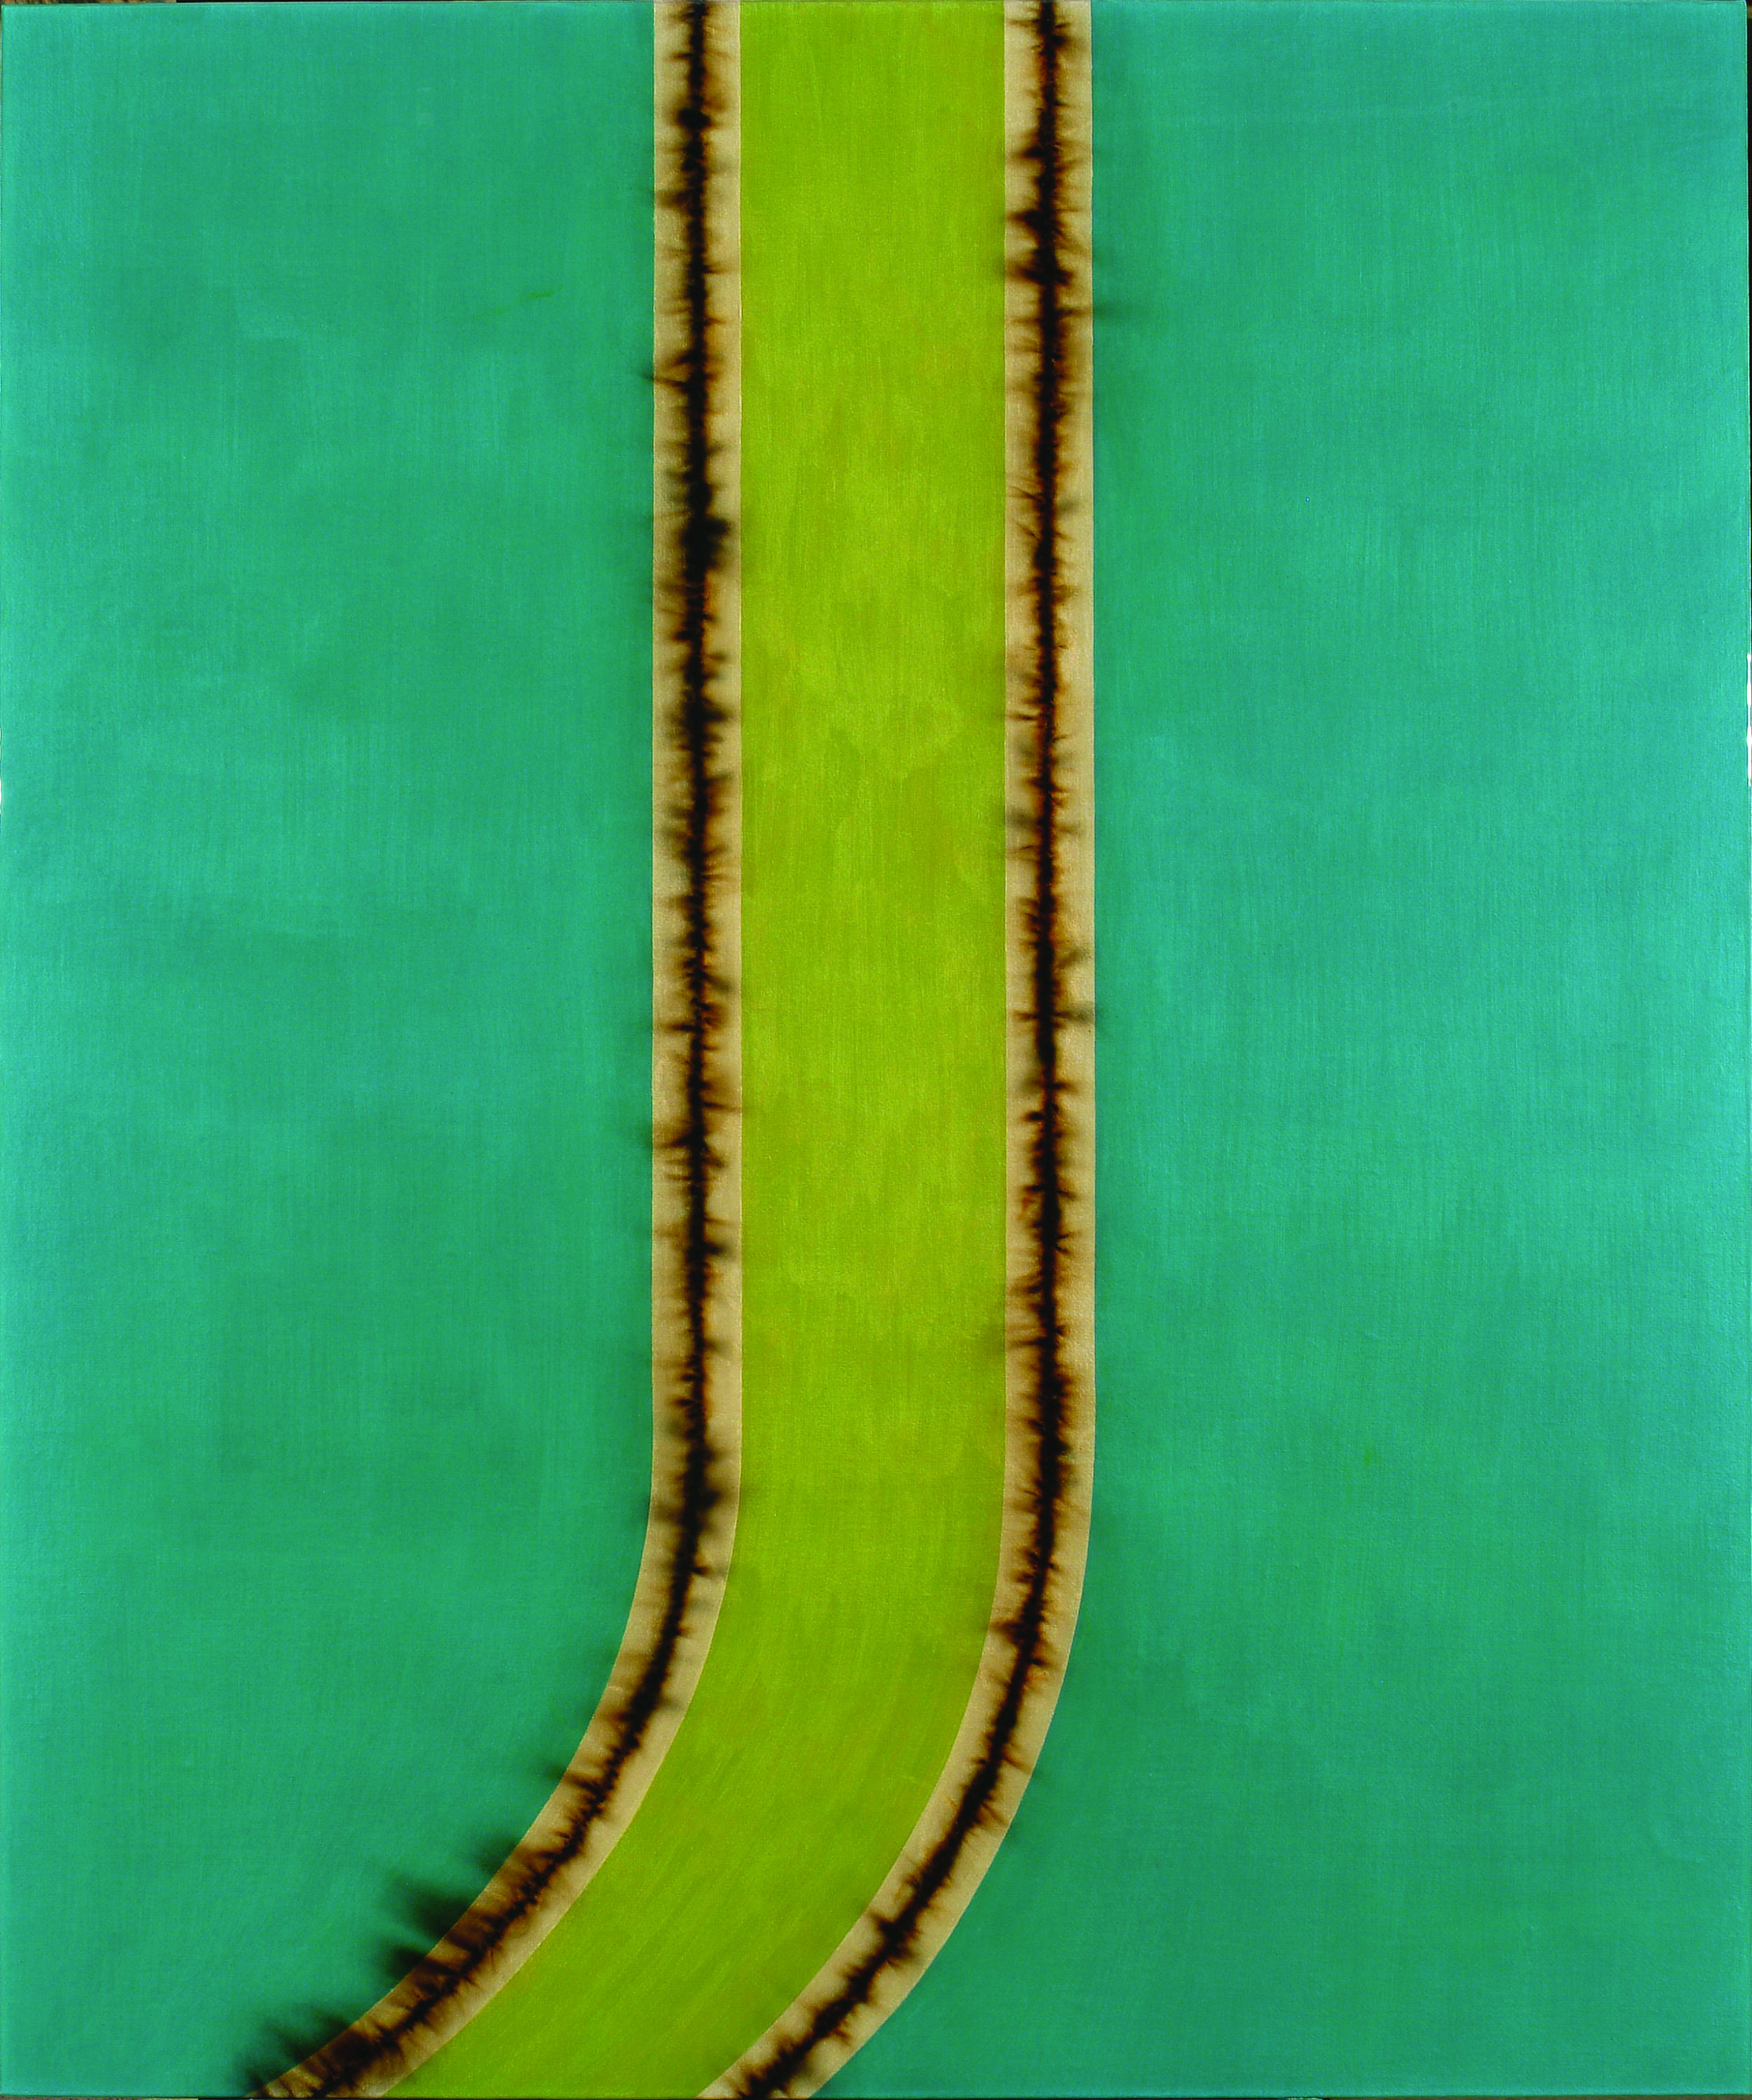 A rectangular, vertical, teal painting split down the middle by a thick chartreuse line that curves left toward the bottom. On either side of the chartreuse line are slimmer, off-white lines with lines of smudged black down the center of each off-white line.